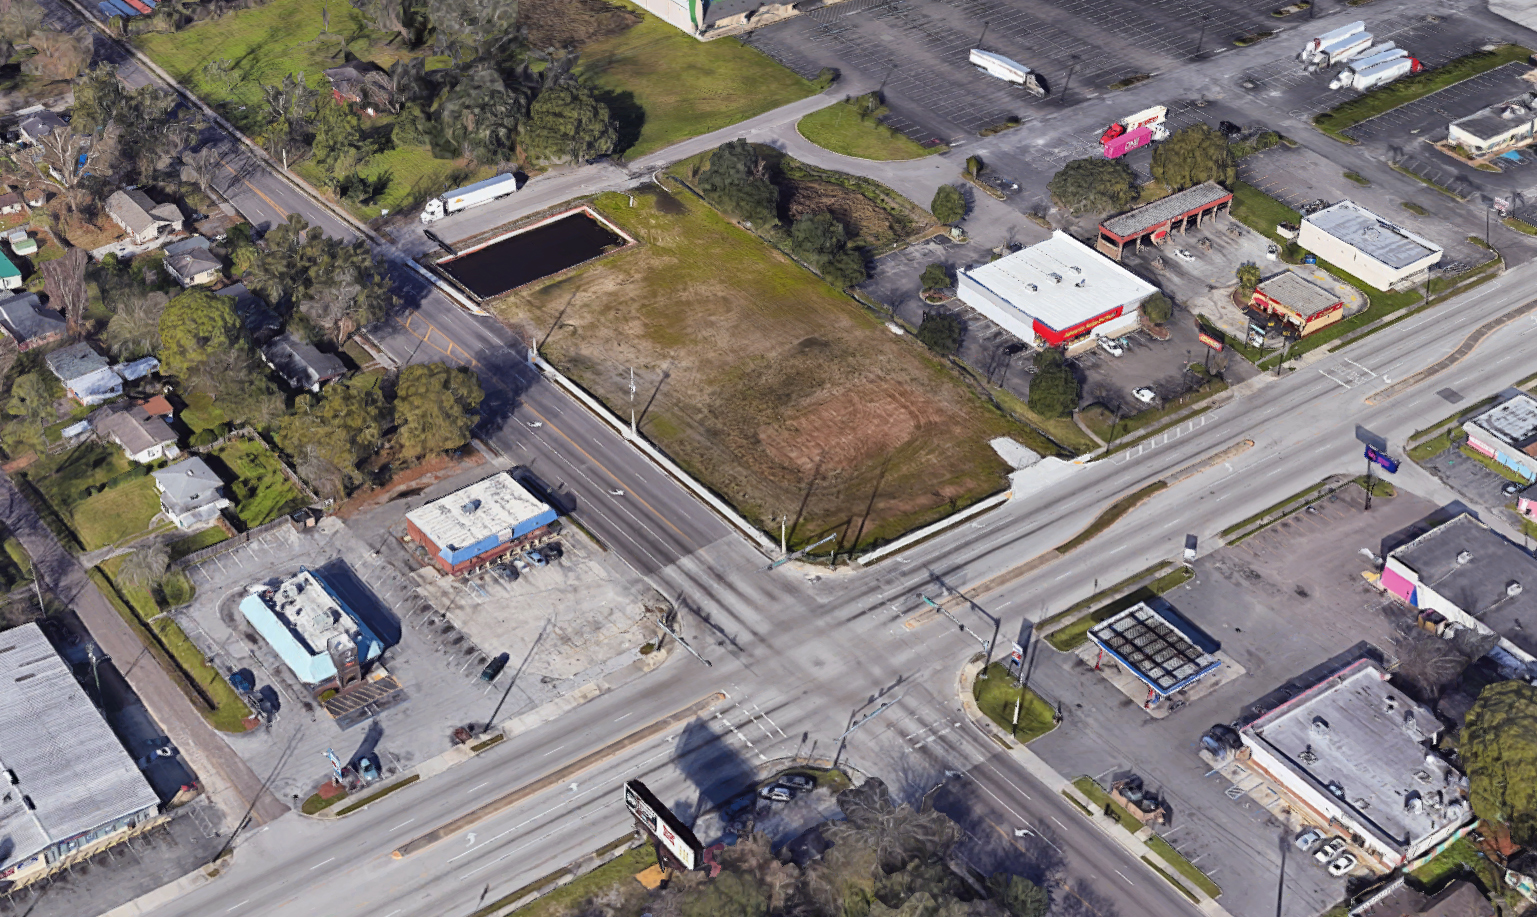 Wawa wants to build at 1004 Edgewood Ave. N. in the Paxon area. (Google)